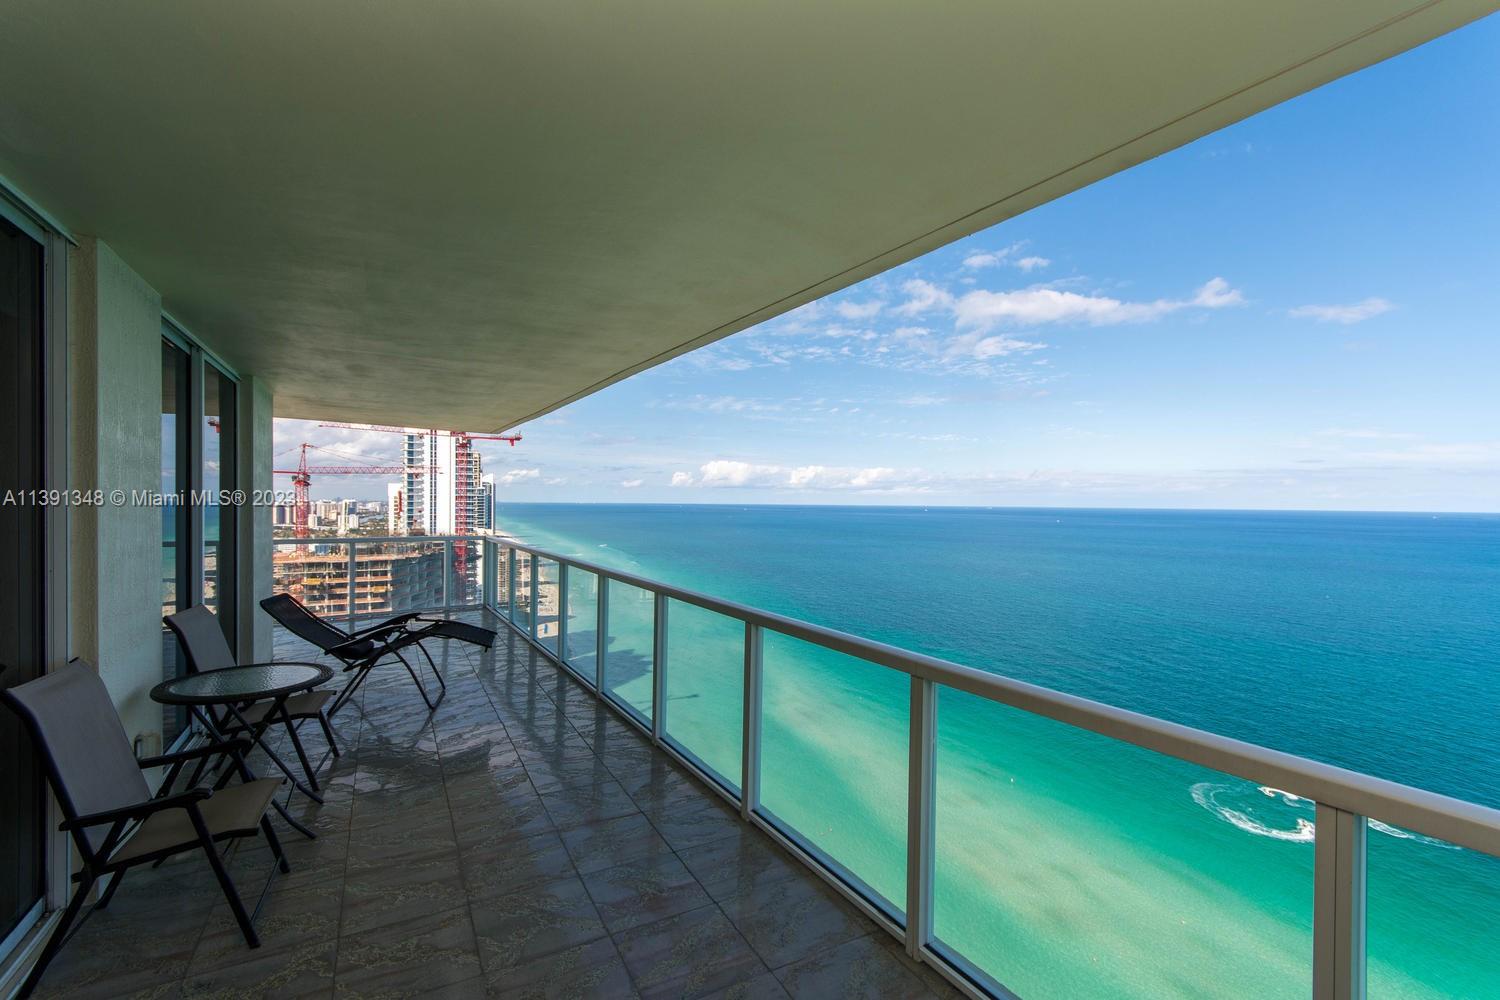 Reduced! Live in the heart of Sunny Isles in the FL Riviera in most desirable line in the building. Stunning direct ocean and intracoastal view from wraparound extended balcony. Beautiful 2/2.5 bath, fully remodeled designer unit, new bathrooms, ceramic tile, automated blackouts. Full beach service, pool, gym, Jacuzzi , kids playroom. Fishing pier with restaurant, walk to all shopping, restaurants, grocery, kids playground, minutes to Aventura Mall, Bal Harbour Shops, FLL airport. Rental allowed 12 times a year, pets friendly. Easy to show. Investors Welcome.